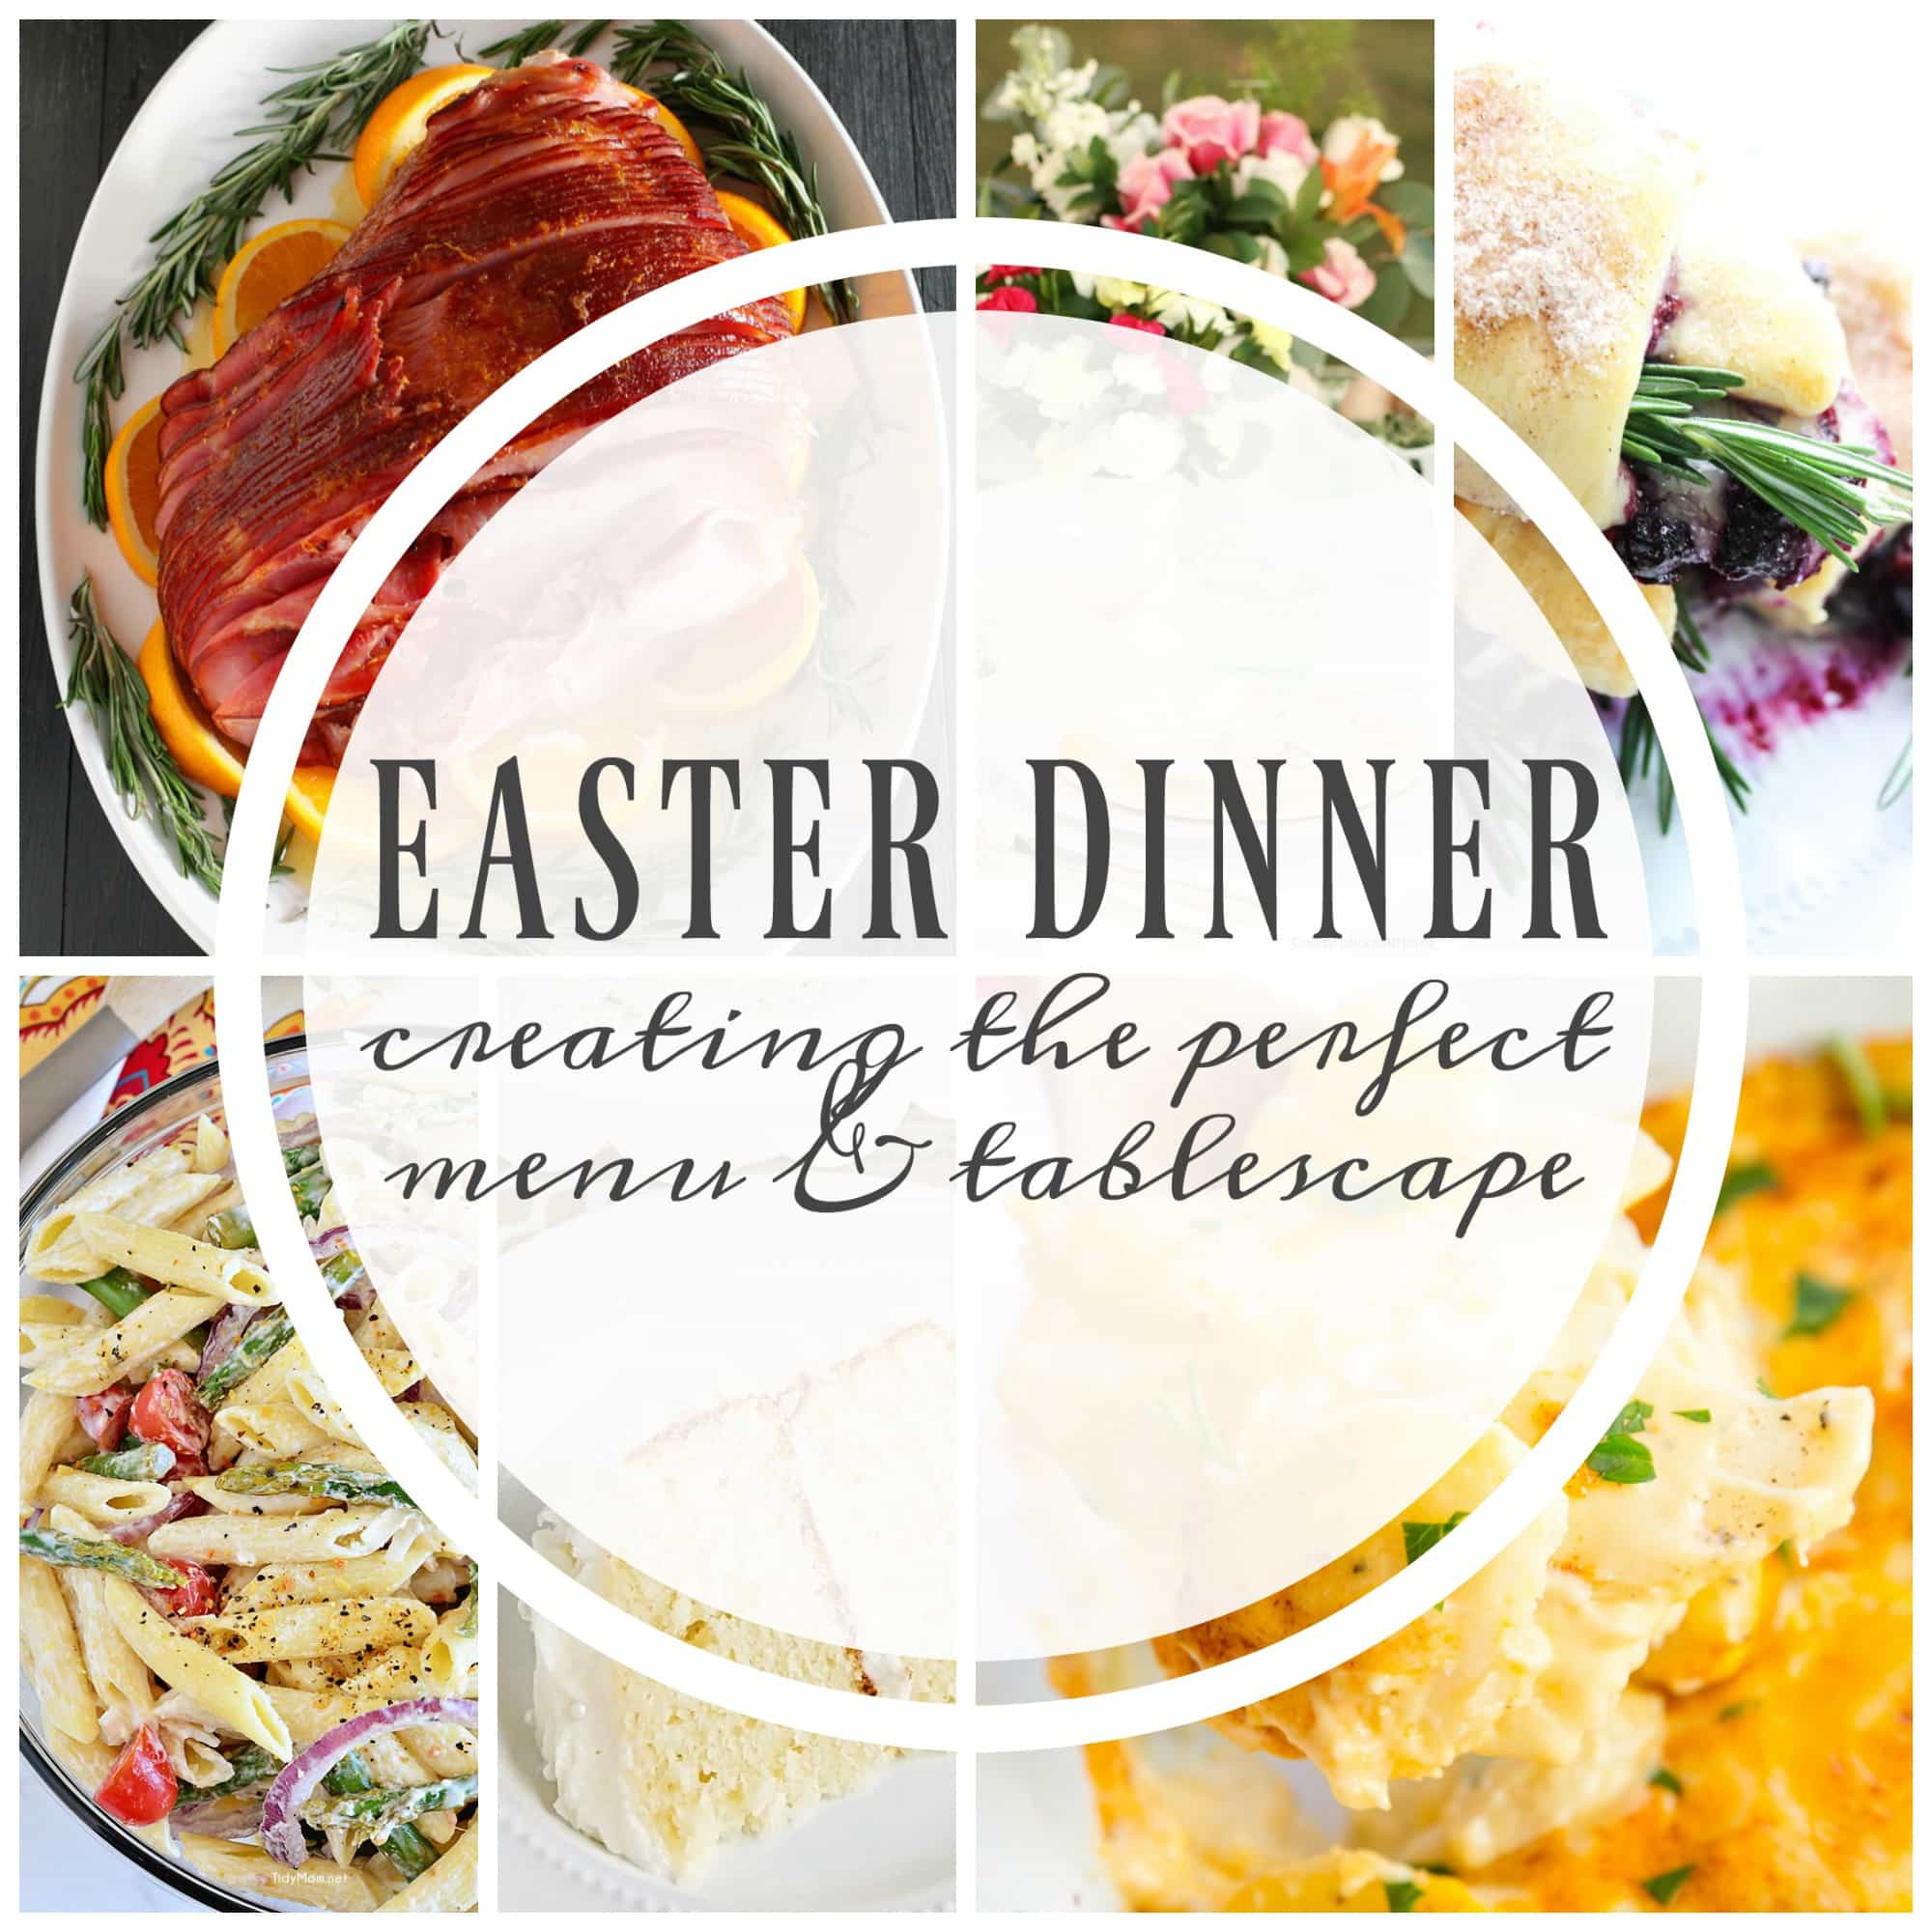 Easter Dinner Menus
 Easter Dinner Creating the Perfect Menu & Tablescape A